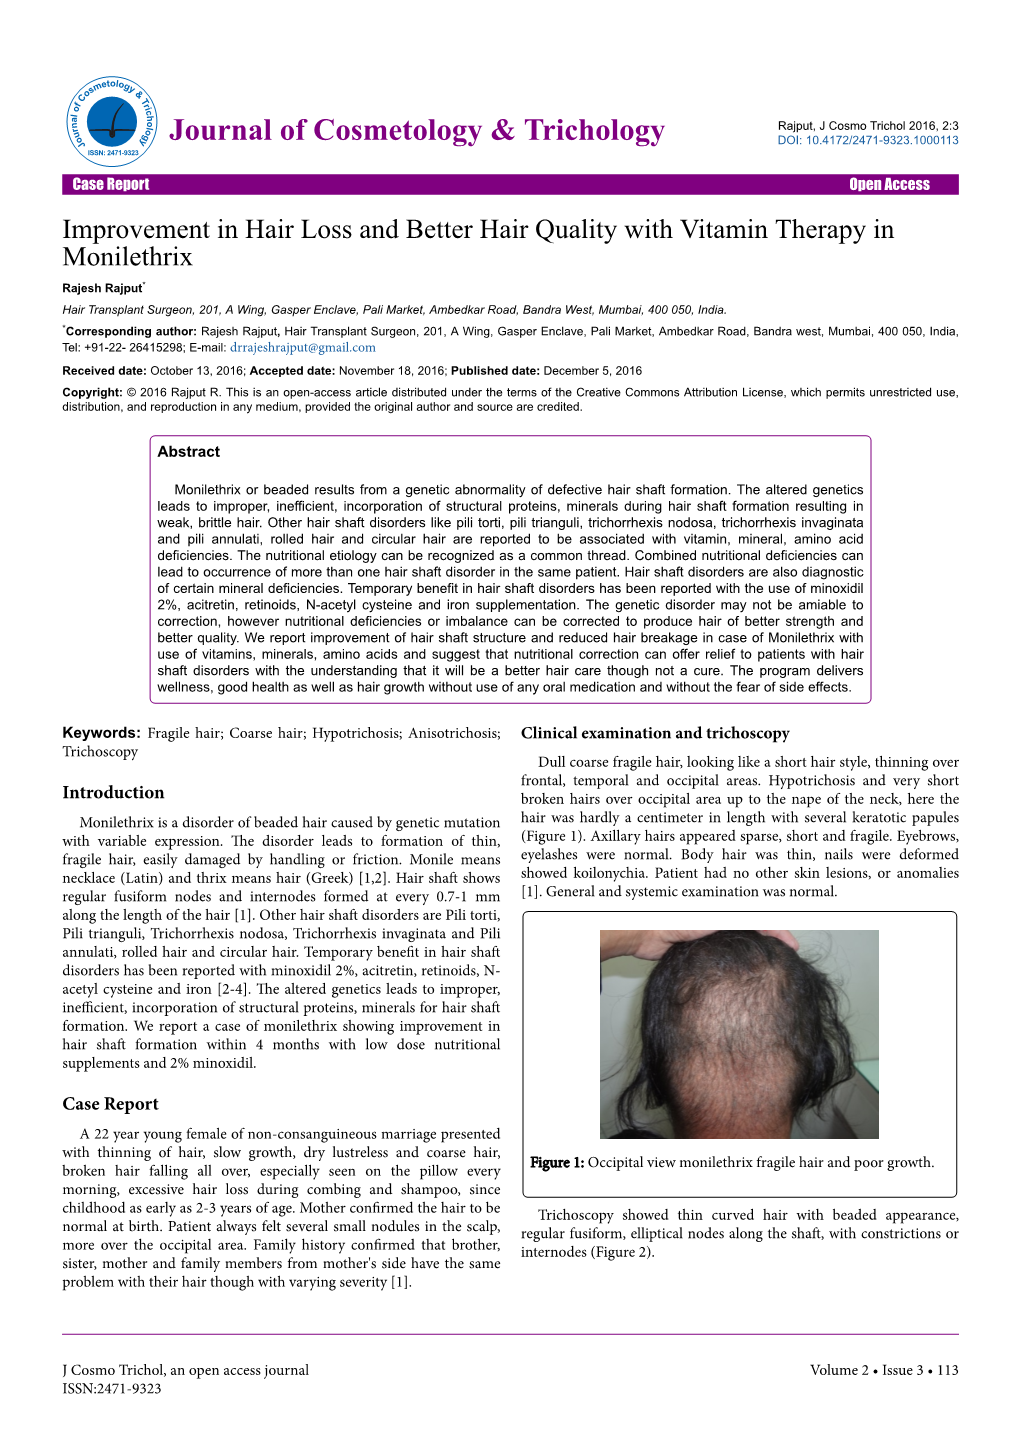 Improvement in Hair Loss and Better Hair Quality with Vitamin Therapy In